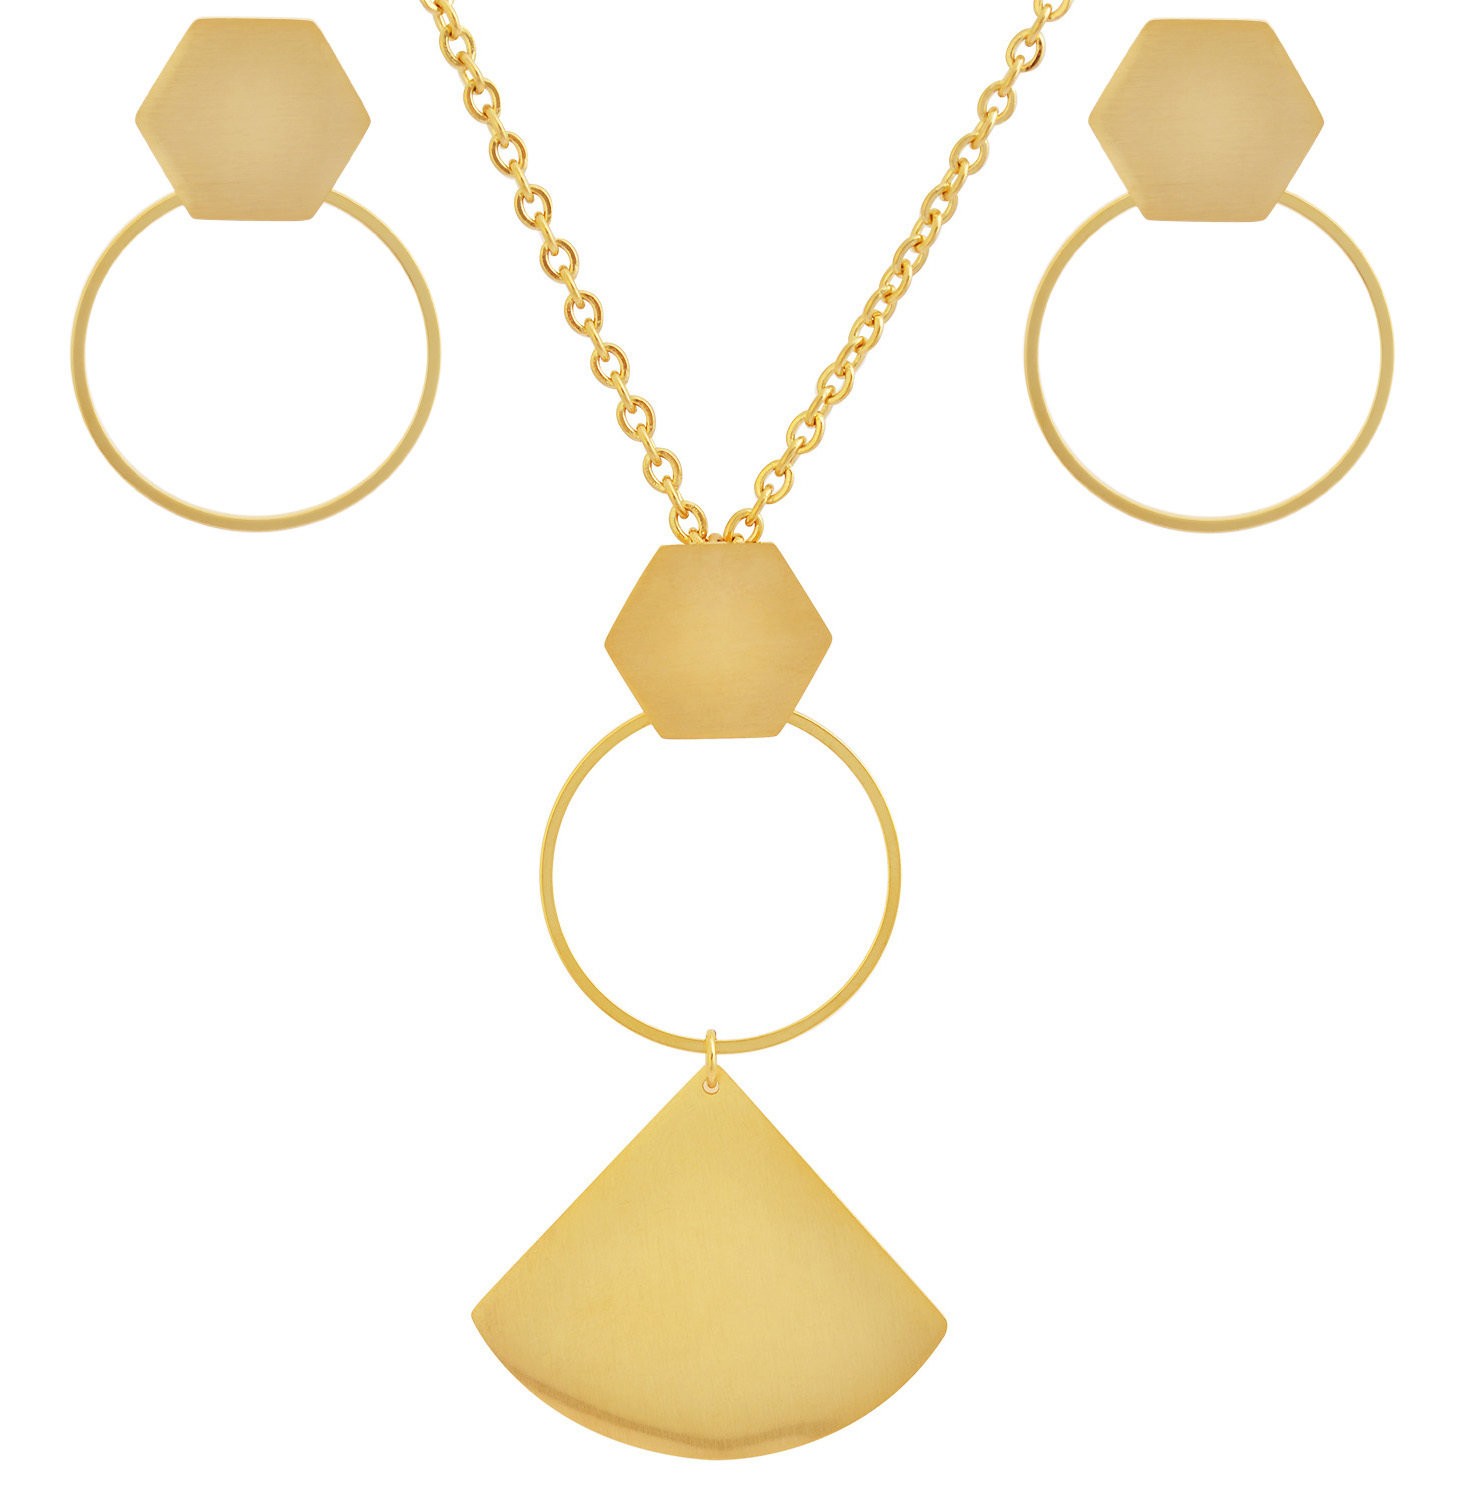 Stainless Steel Yellow Gold Tone Necklace & Earring Set 24 Inches Long With 2 Inches Extension